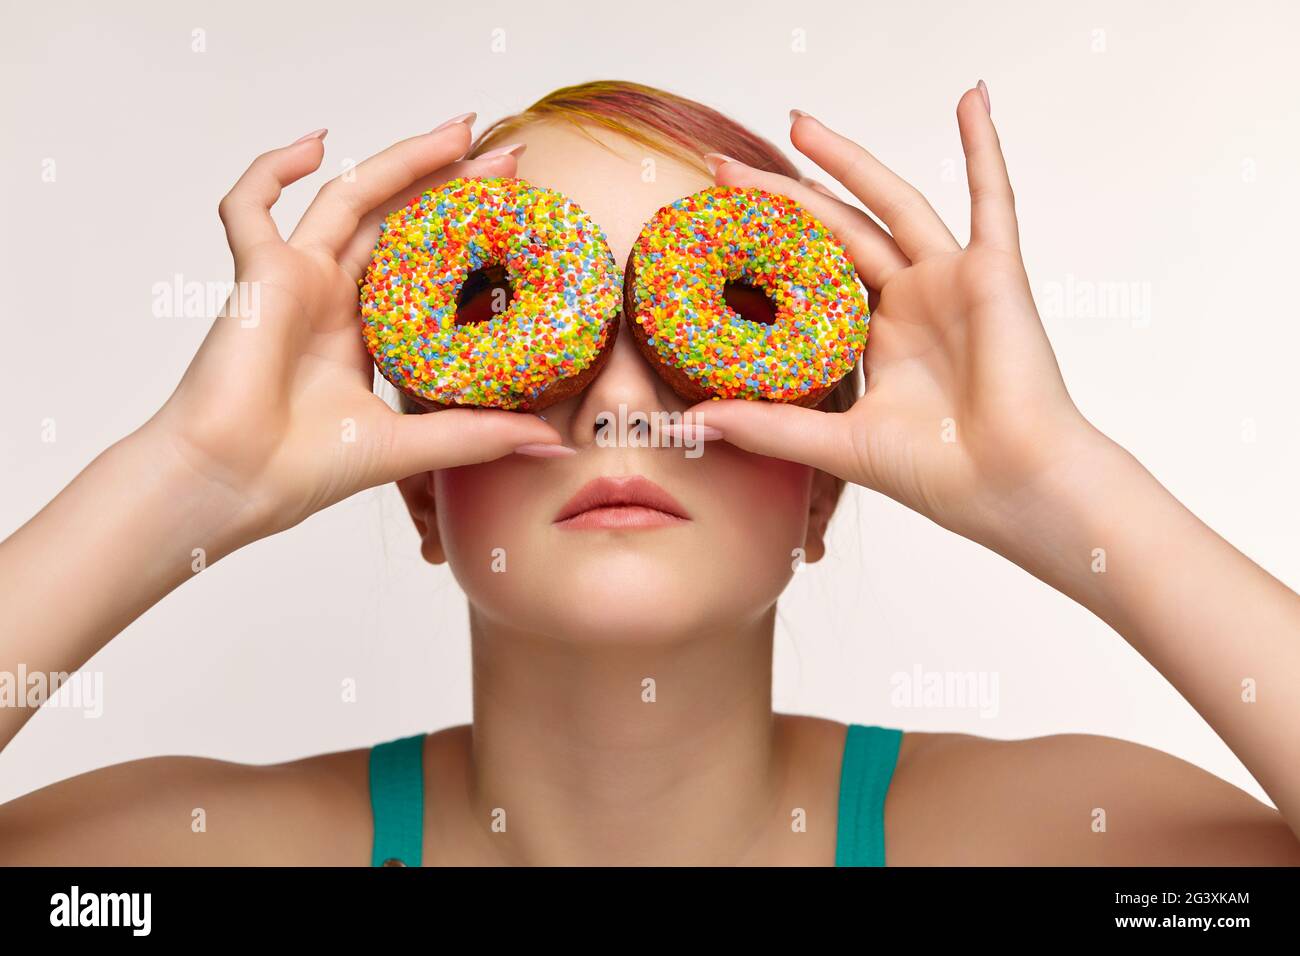 Teenager girl with unusual face art make-up . Child looking through holes in donuts. Stock Photo